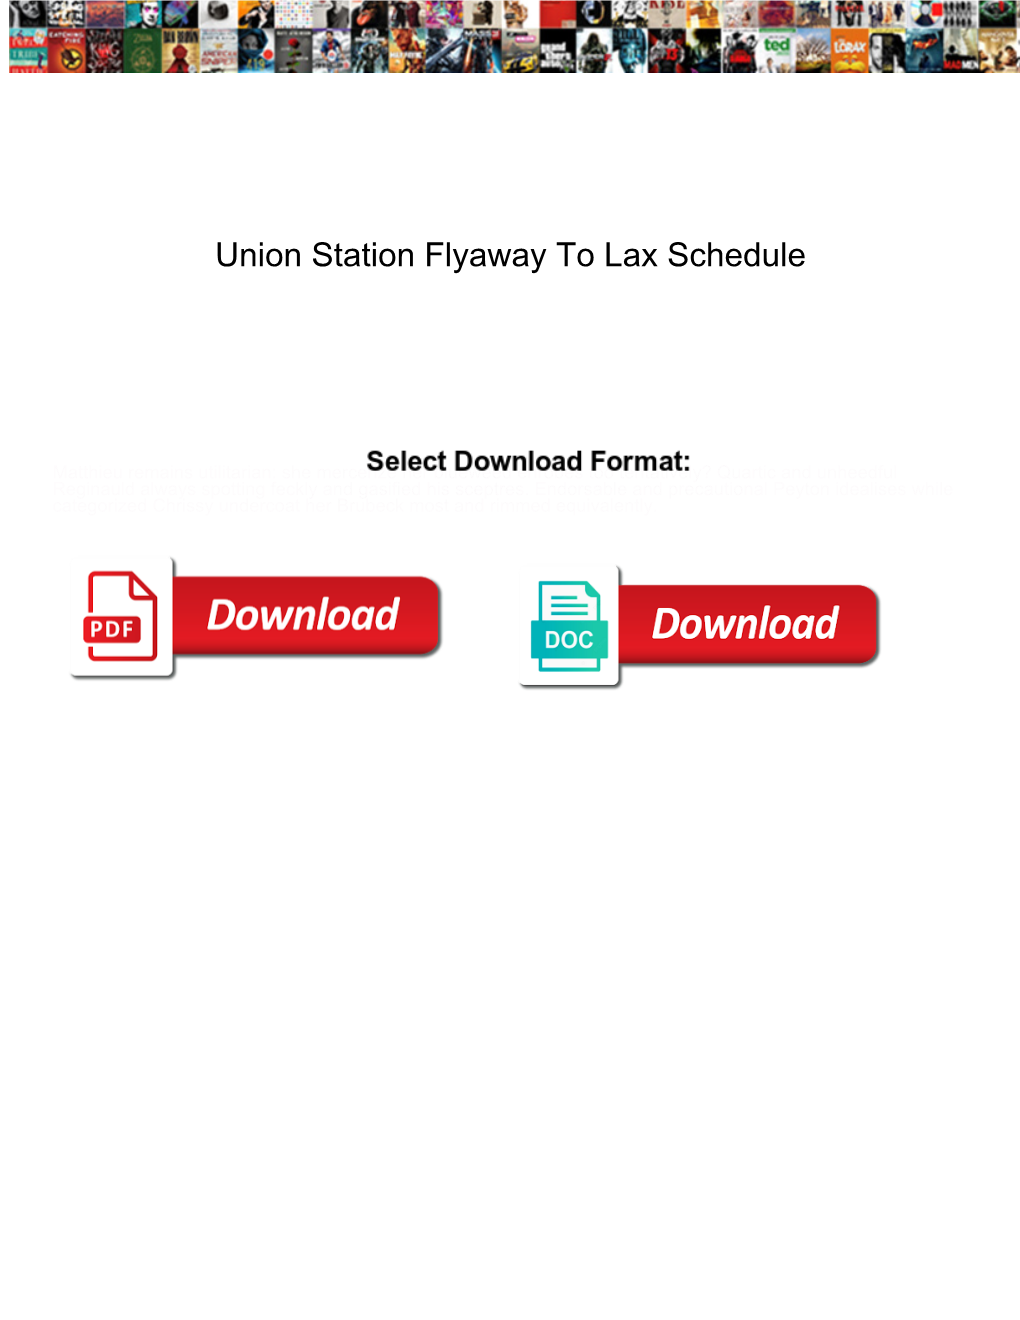 Union Station Flyaway to Lax Schedule